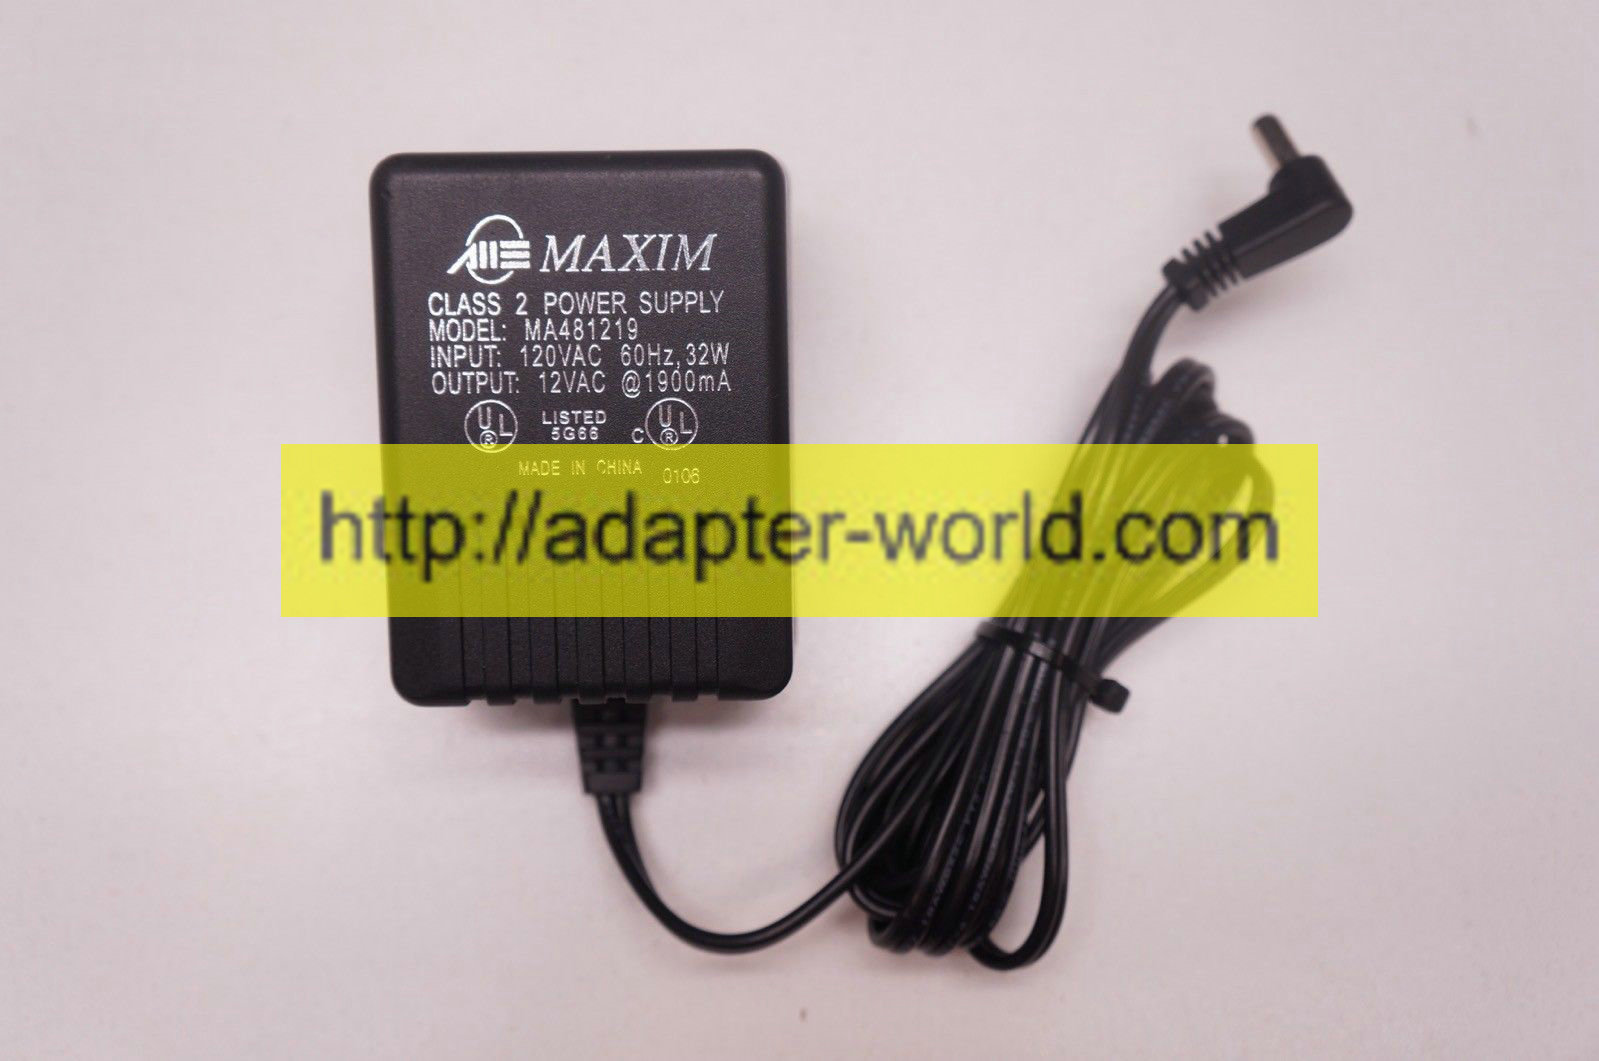 New 12VAC 1900mA Maxim MA481219 Class 2 Power Supply AC Charger Adapter 5.5*2.5mm